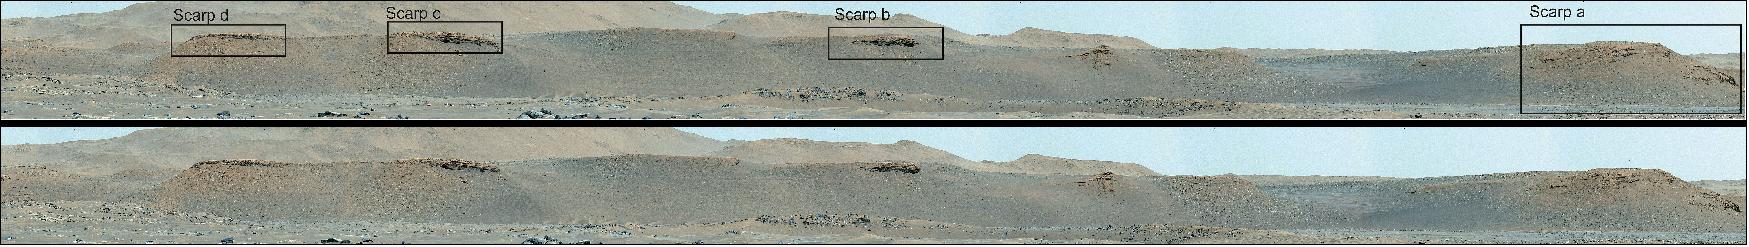 Figure 12: The top mosaic of Jezero Crater's river delta was stitched together from multiple images taken by the Mastcam-Z instrument aboard NASA's Perseverance rover on Apr. 17, 2021. The bottom annotated image highlights the location of four prominent long, steep slopes known as escarpments, or scarps (image credit: NASA/JPL-Caltech/ASU/MSSS)